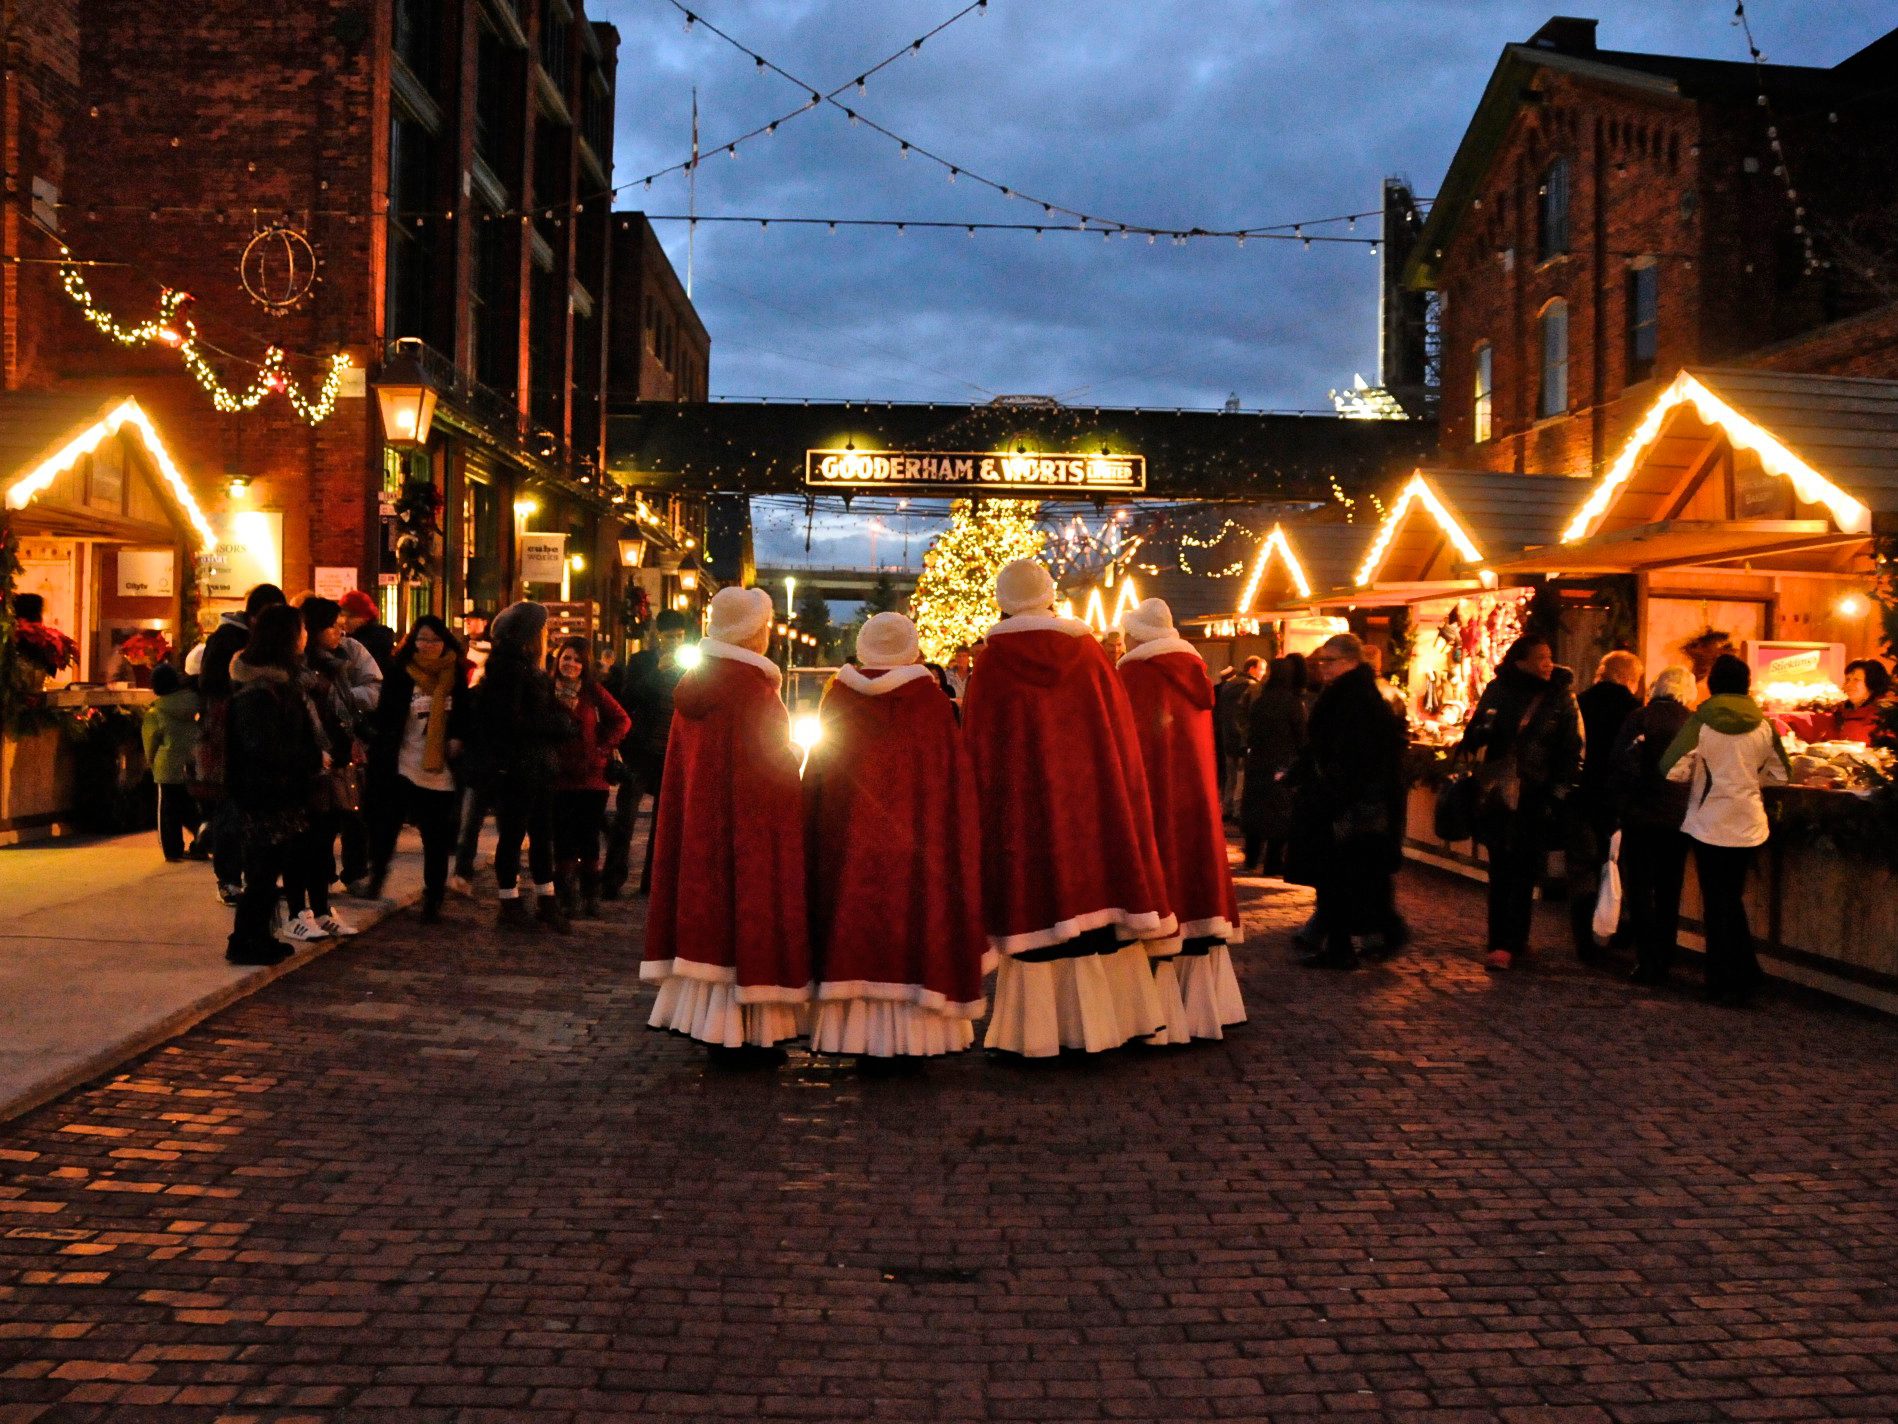 10. The Distillery Historic District Christmas Market